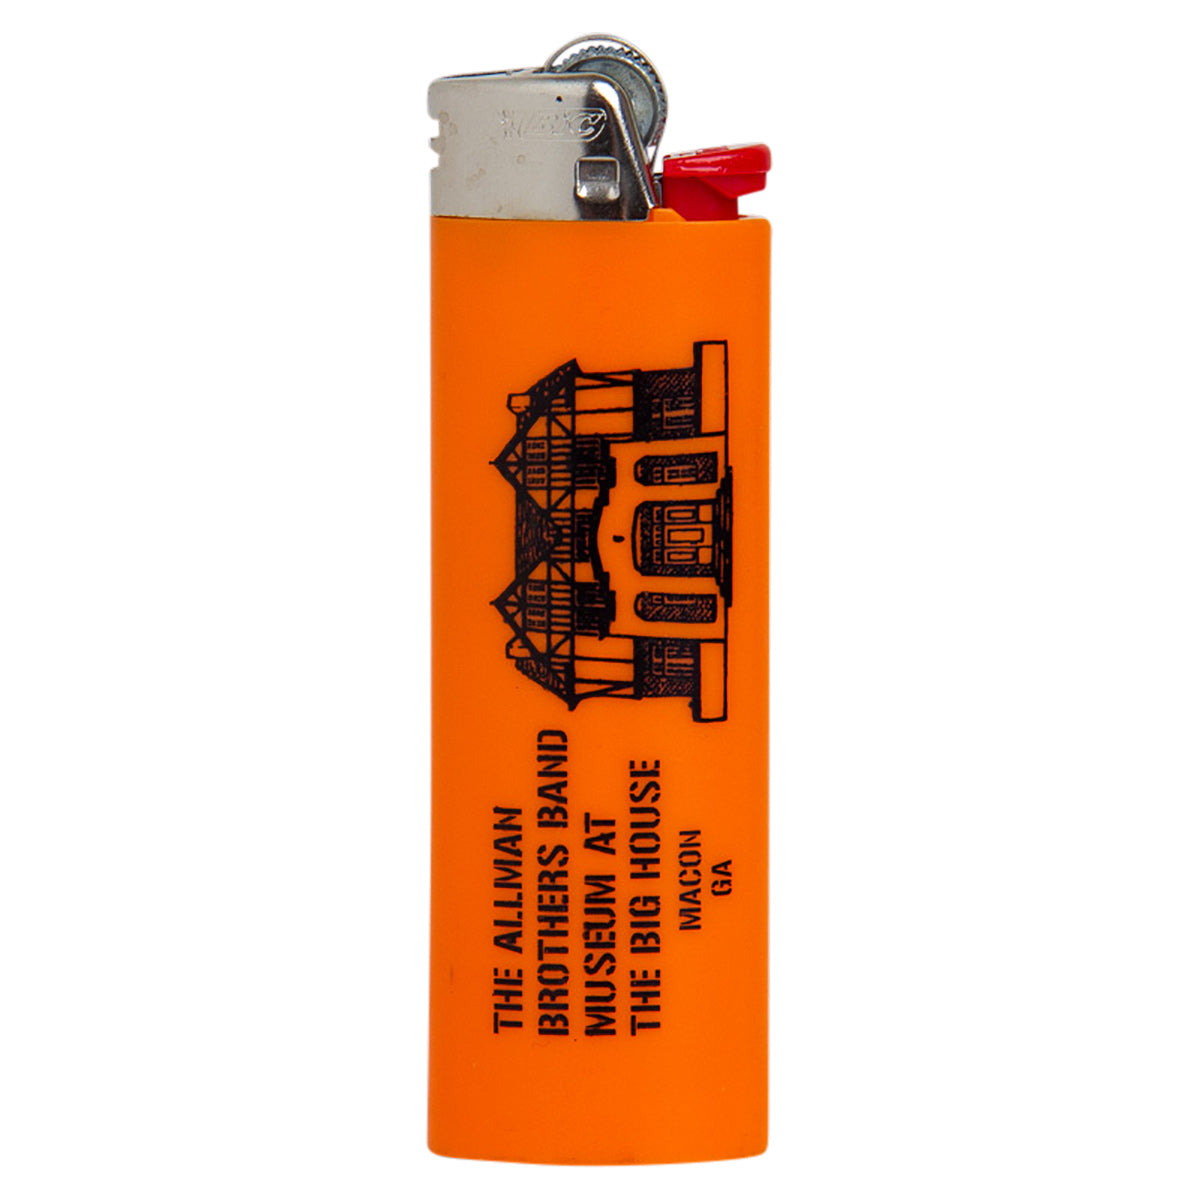 The Big House Museum Bic Lighter